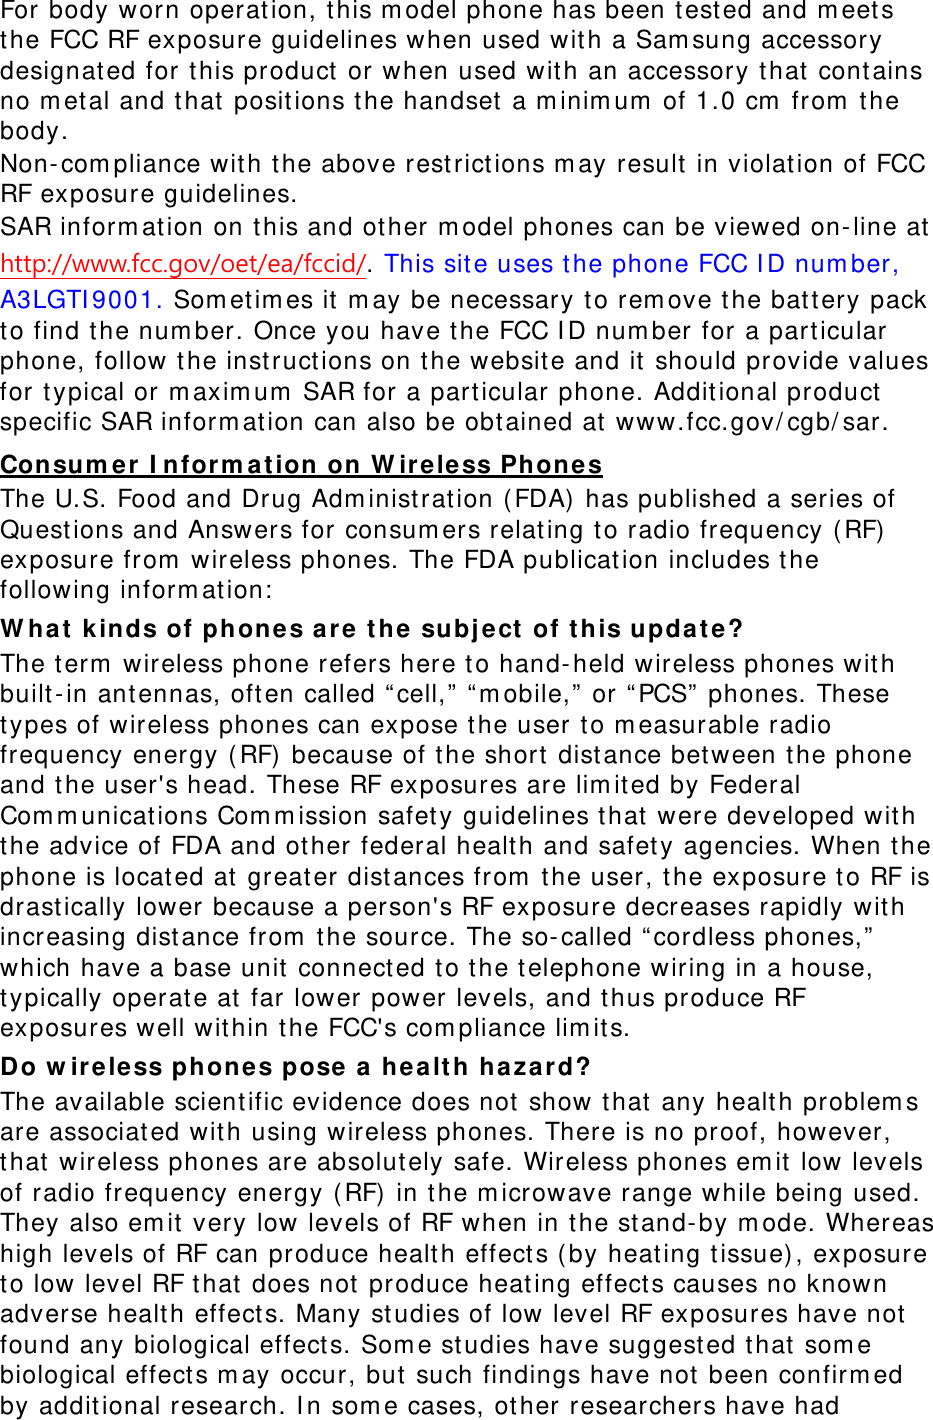 For body worn operation, t his m odel phone has been test ed and m eets the FCC RF exposure guidelines when used with a Sam sung accessory designat ed for this product or when used wit h an accessory that  cont ains no m et al and that positions t he handset  a m inim um  of 1.0 cm  from  t he body.  Non-com pliance with the above rest rictions m ay result in violation of FCC RF exposure guidelines. SAR inform at ion on this and ot her m odel phones can be viewed on-line at http://www.fcc.gov/oet/ea/fccid/. This site uses t he phone FCC I D num ber, A3LGTI 9001. Som et im es it m ay be necessary to rem ove the battery pack to find t he num ber. Once you have the FCC I D num ber for a particular phone, follow t he inst ruct ions on t he website and it should provide values for t ypical or m axim um  SAR for a particular phone. Additional product  specific SAR inform ation can also be obtained at www.fcc.gov/ cgb/ sar. Consum e r  I nform at ion on W irele ss Phones The U.S. Food and Drug Adm inist ration (FDA)  has published a series of Quest ions and Answers for consum ers relat ing t o radio frequency (RF)  exposure from  wireless phones. The FDA publicat ion includes t he following inform ation:  W ha t  kinds of phone s are t h e  subj e ct of this upda t e? The term  wireless phone refers here to hand-held wireless phones with built -in antennas, often called “ cell,”  “ m obile,”  or “ PCS”  phones. These types of wireless phones can expose the user t o m easurable radio frequency energy (RF)  because of the short dist ance between the phone and the user&apos;s head. These RF exposures are lim ited by Federal Com m unications Com m ission safety guidelines t hat  were developed with the advice of FDA and other federal health and safet y agencies. When the phone is locat ed at greater dist ances from  the user, the exposure t o RF is drastically lower because a person&apos;s RF exposure decreases rapidly with increasing dist ance from  the source. The so- called “ cordless phones,” which have a base unit connected to the telephone wiring in a house, typically operate at far lower power levels, and thus produce RF exposures well wit hin the FCC&apos;s com pliance lim its. Do w ireless phones pose  a  he alt h ha za rd? The available scientific evidence does not show that any healt h problem s are associat ed with using wireless phones. There is no proof, however, that  wireless phones are absolut ely safe. Wireless phones em it low levels of radio frequency energy ( RF)  in t he m icrowave range while being used. They also em it very low levels of RF when in the stand-by m ode. Whereas high levels of RF can produce healt h effects ( by heating tissue), exposure to low level RF that does not produce heating effect s causes no known adverse healt h effect s. Many st udies of low level RF exposures have not found any biological effects. Som e st udies have suggest ed t hat som e biological effects m ay occur, but  such findings have not  been confirm ed by additional research. I n som e cases, other researchers have had 